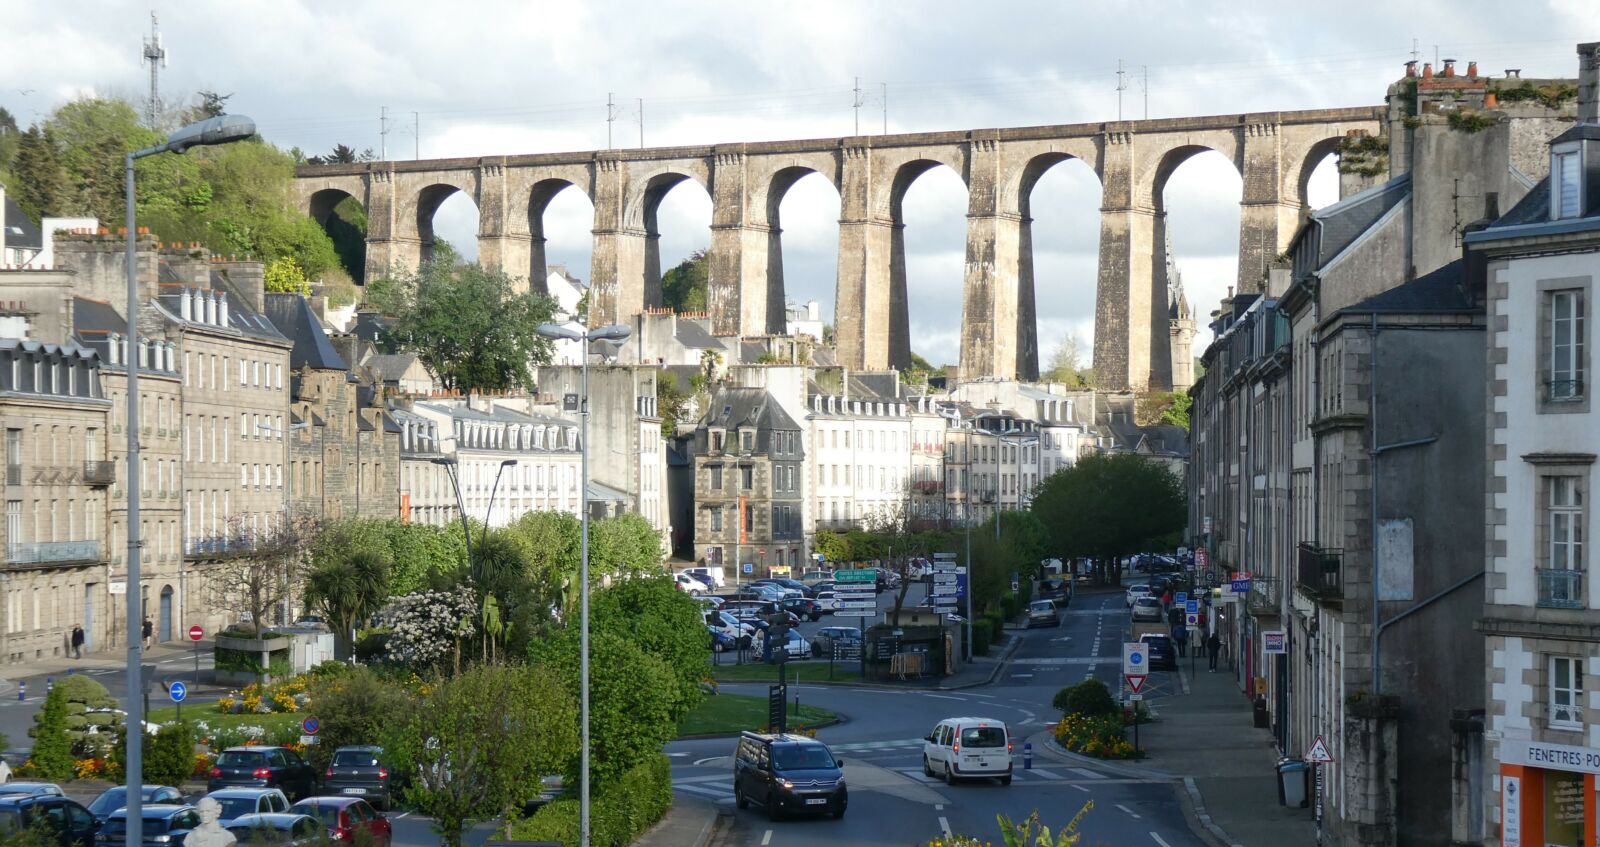 Viaduct over houses